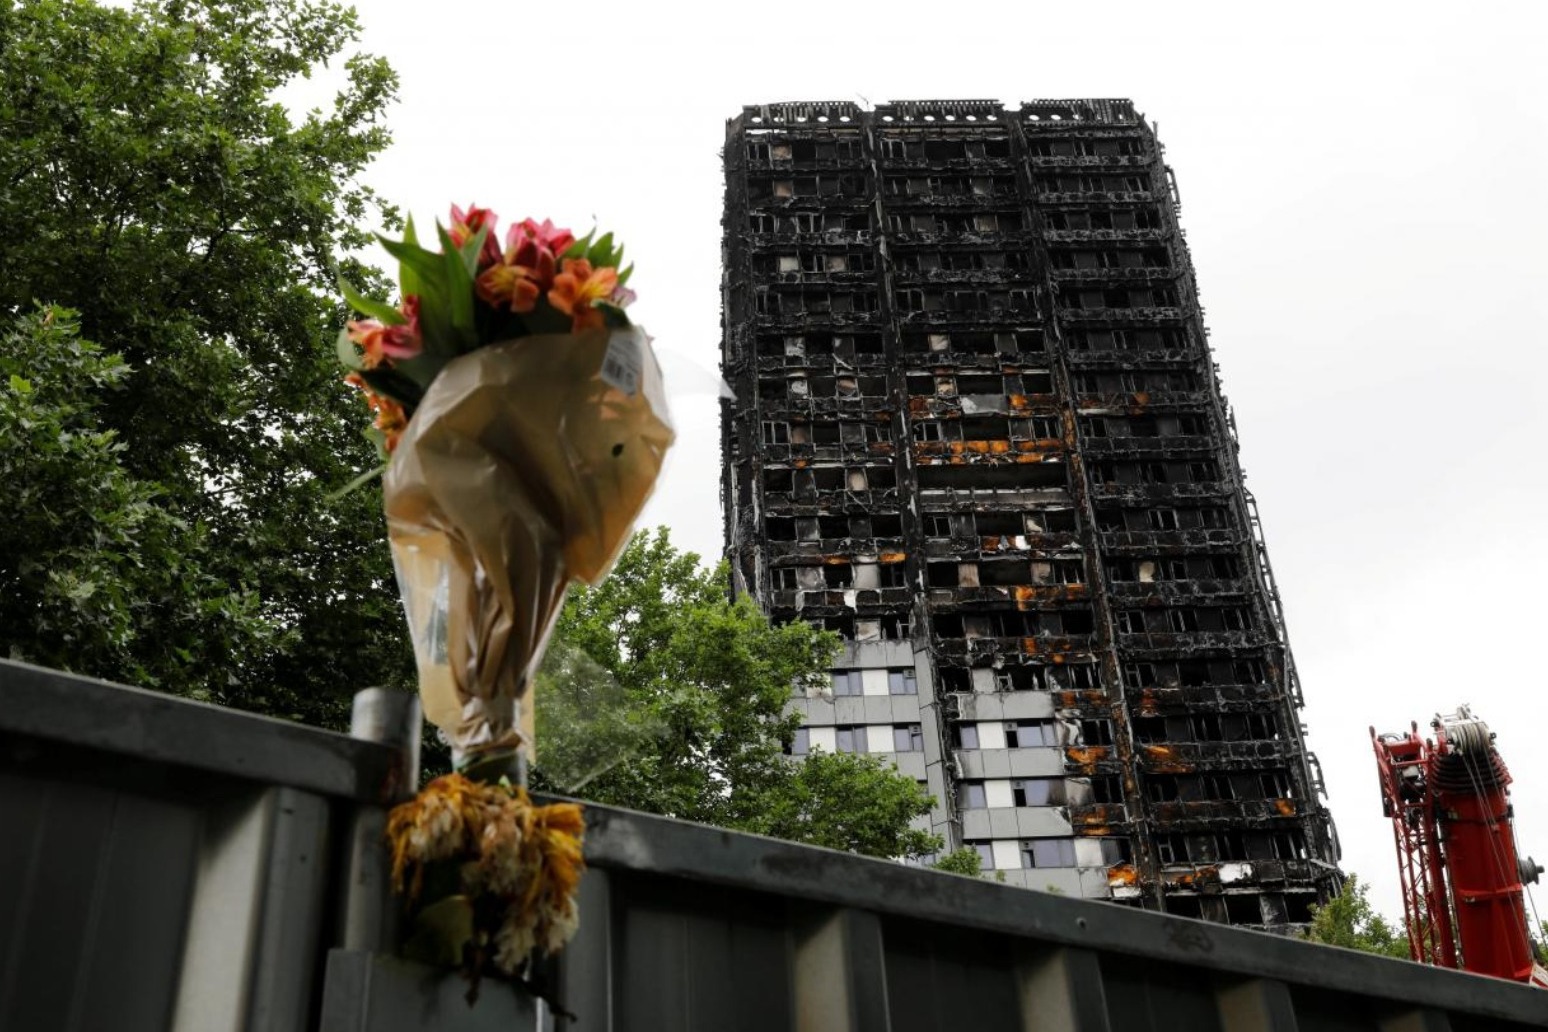 Social housing commission launched in the wake of the Grenfell fire 